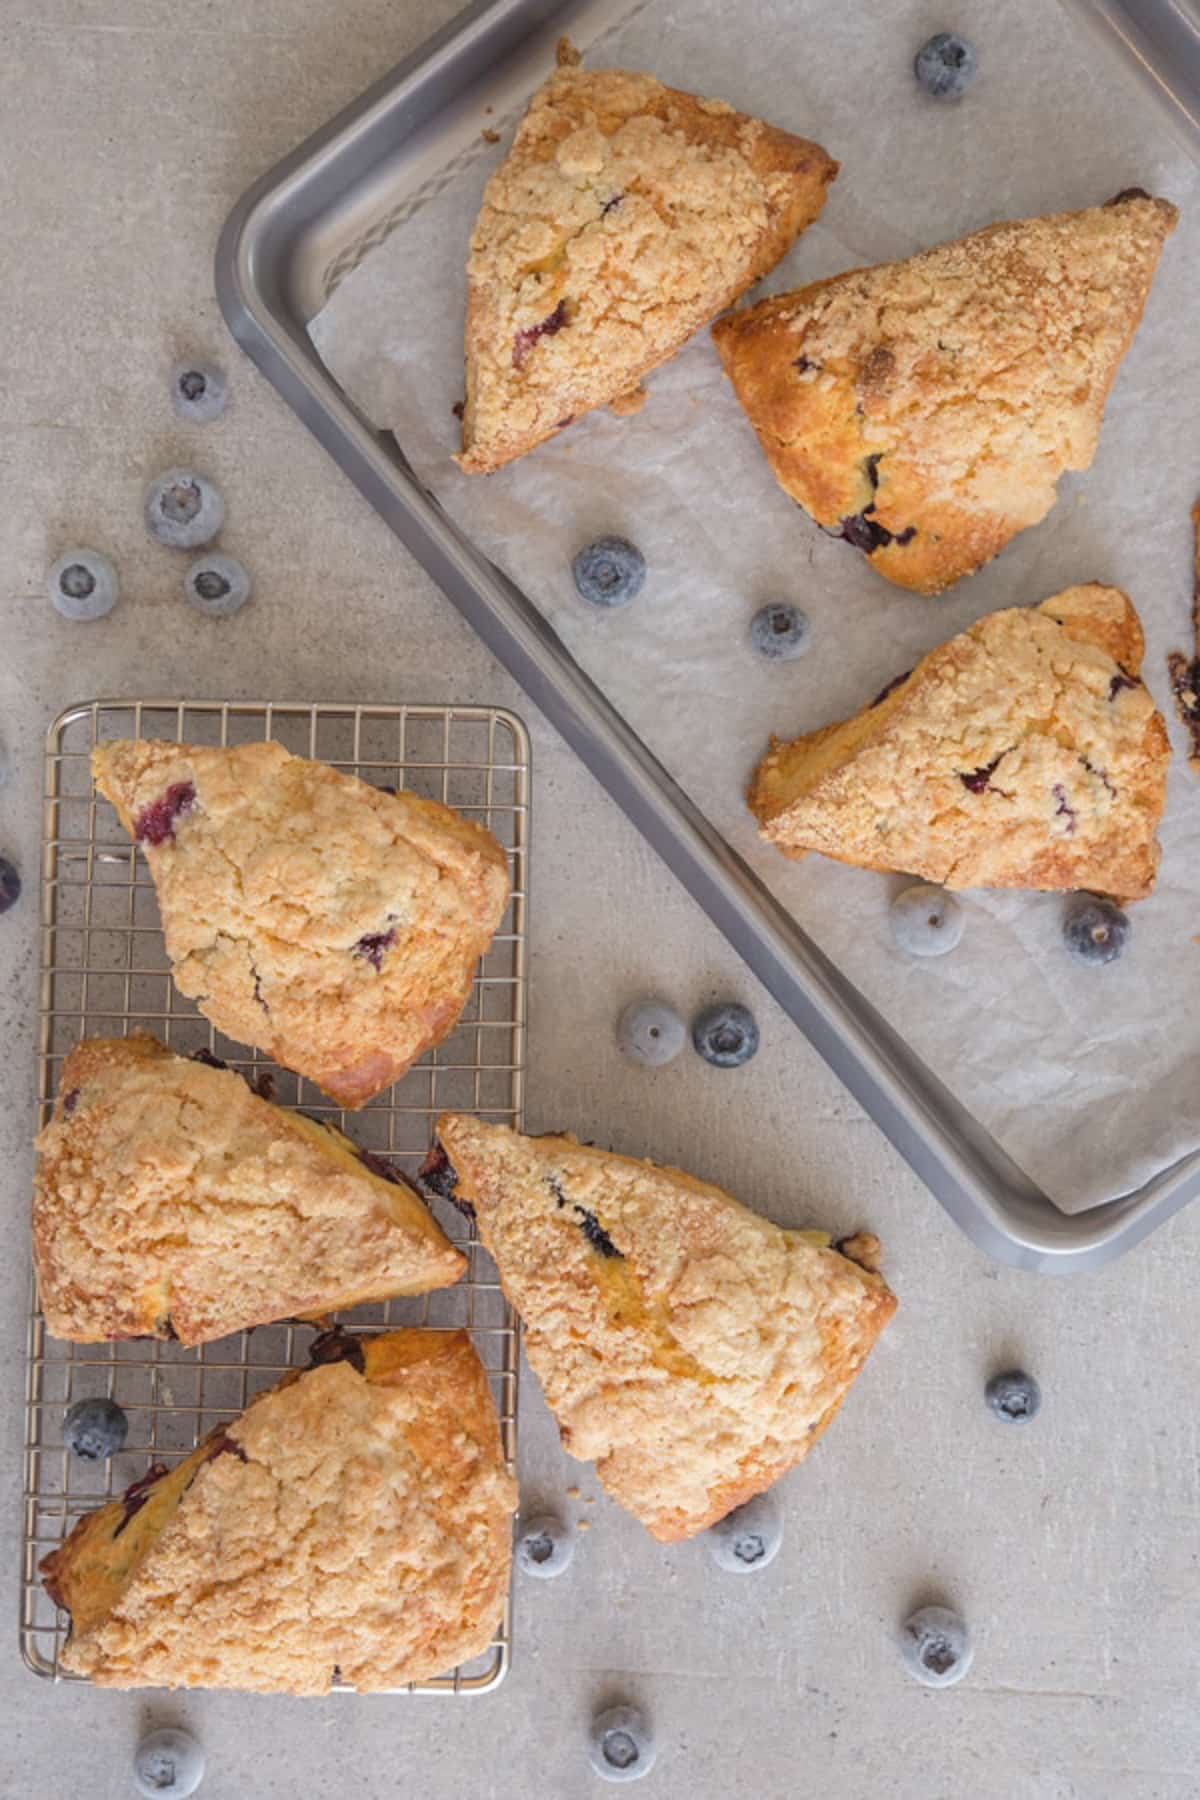 Lemon Blueberry Scones with a Crumb Topping